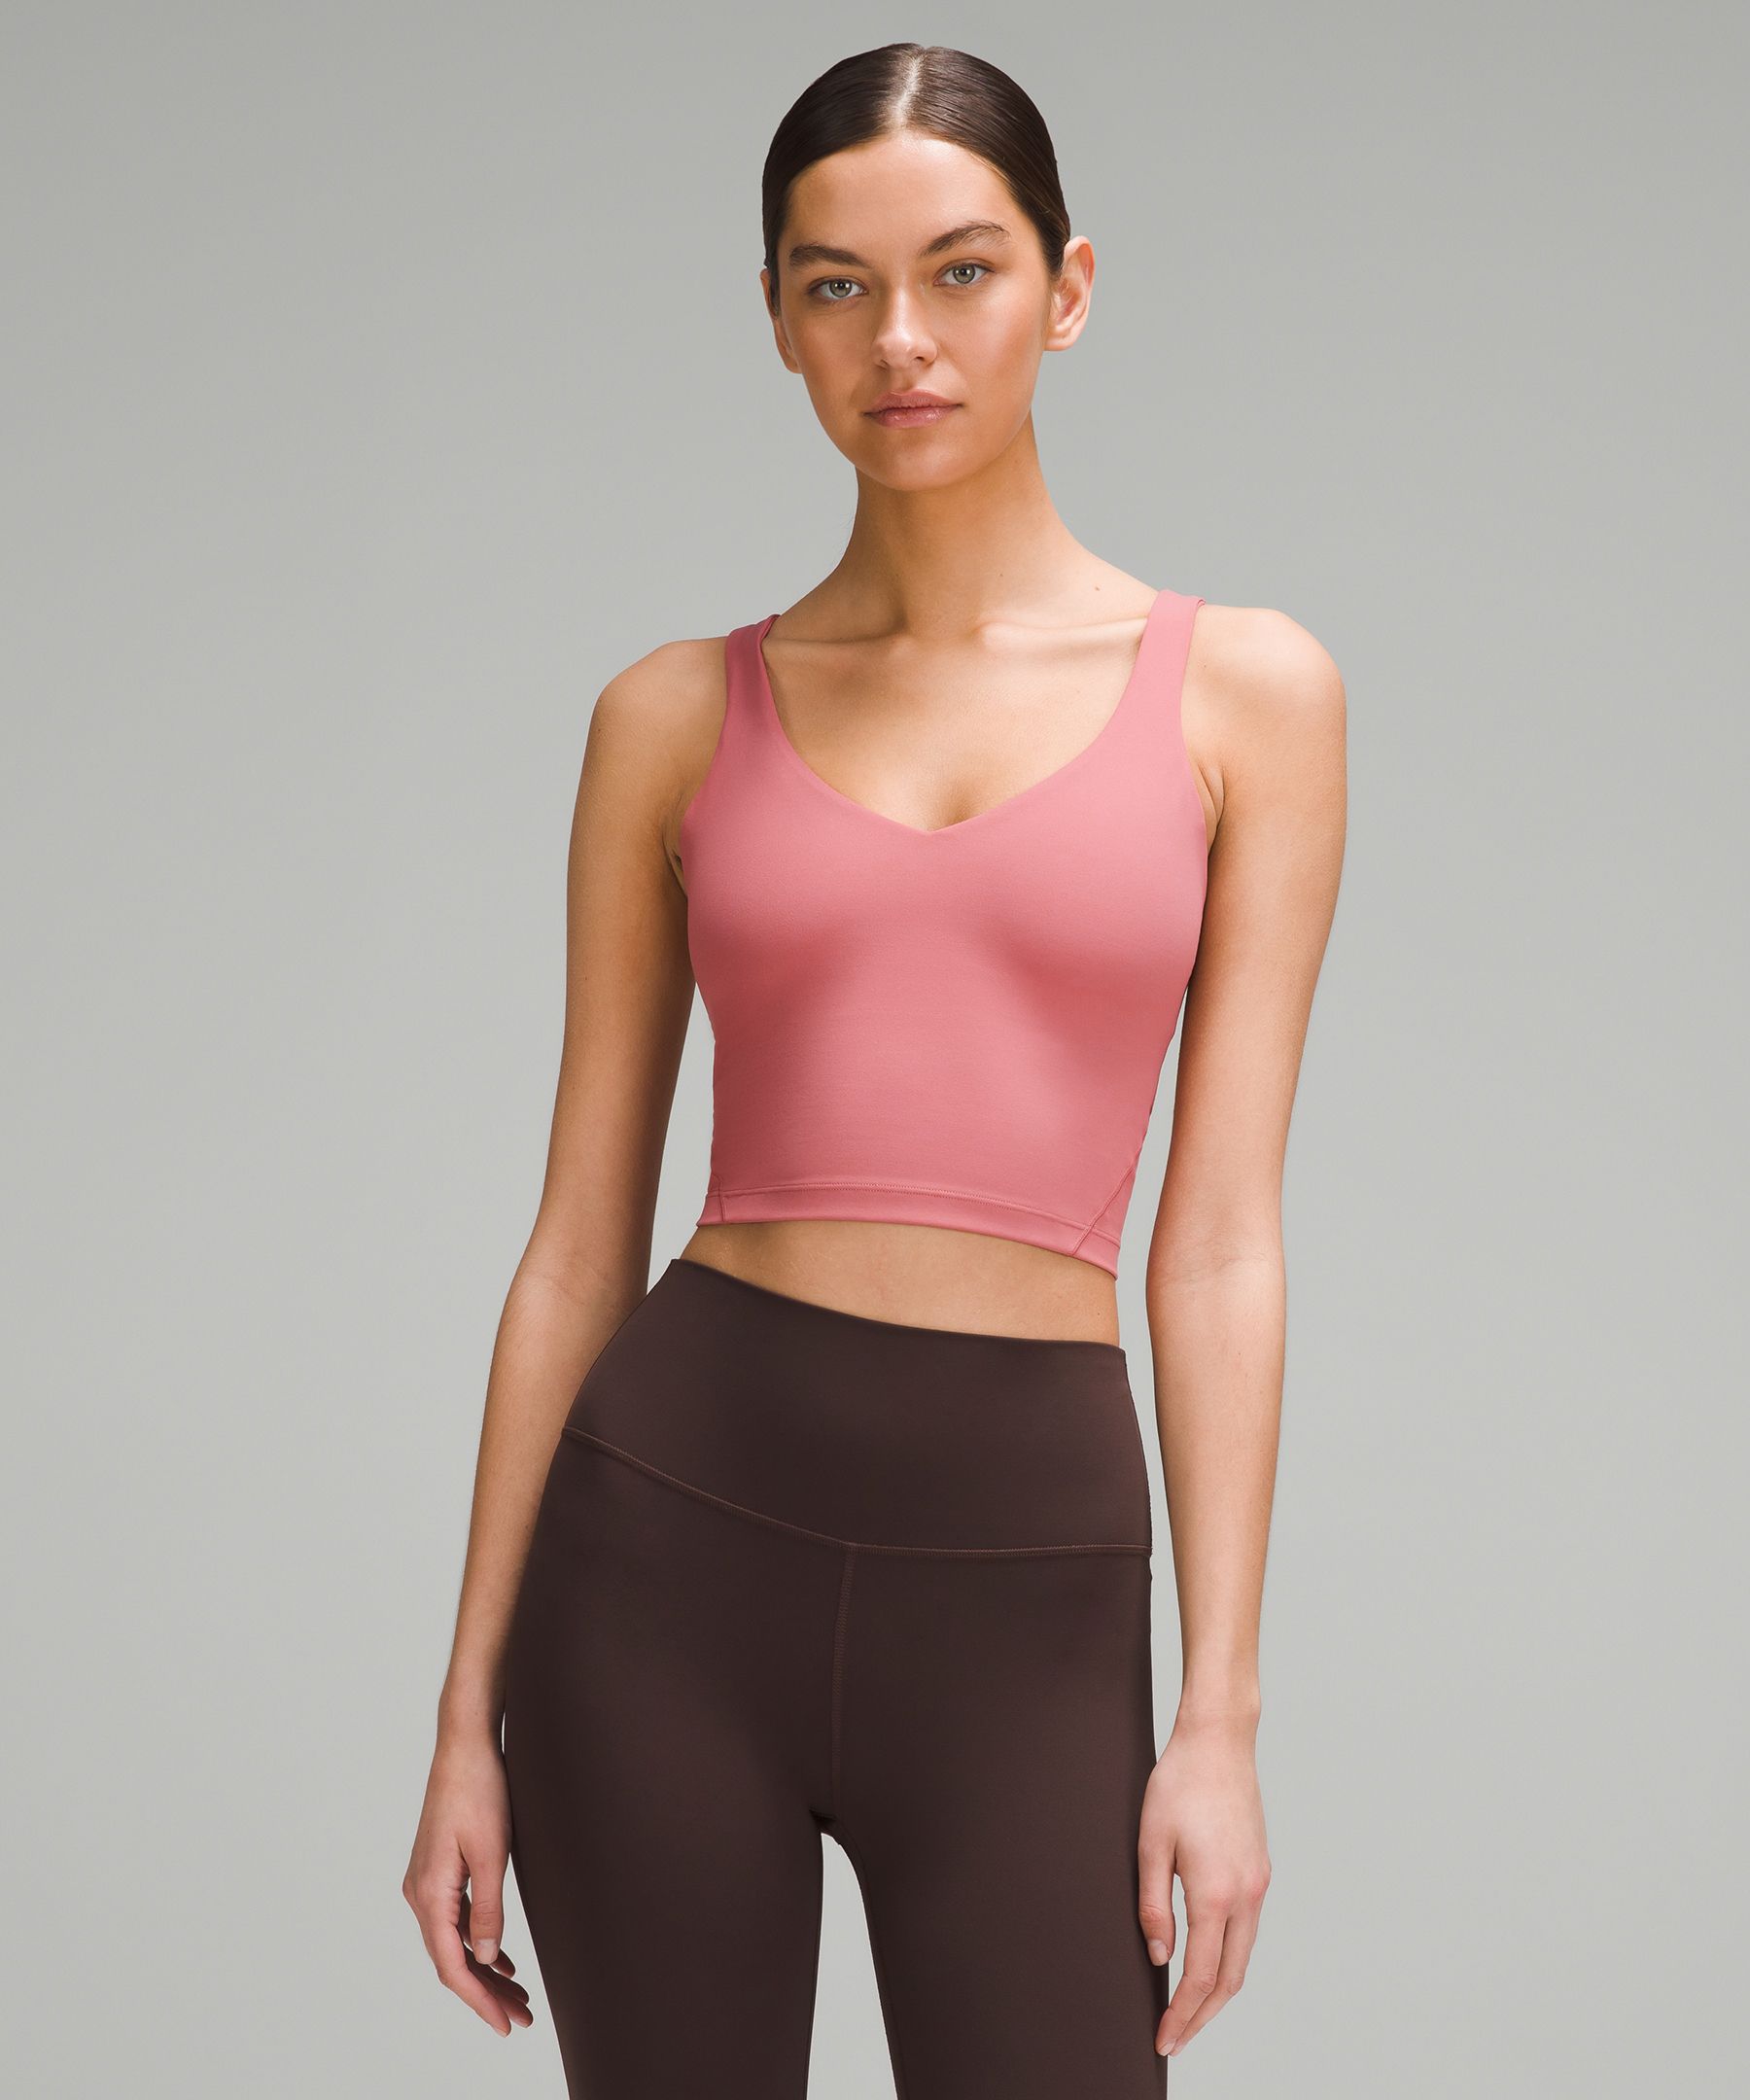 Lululemon NWT Align Tank - Pink Puff Size 14 - $59 New With Tags - From A